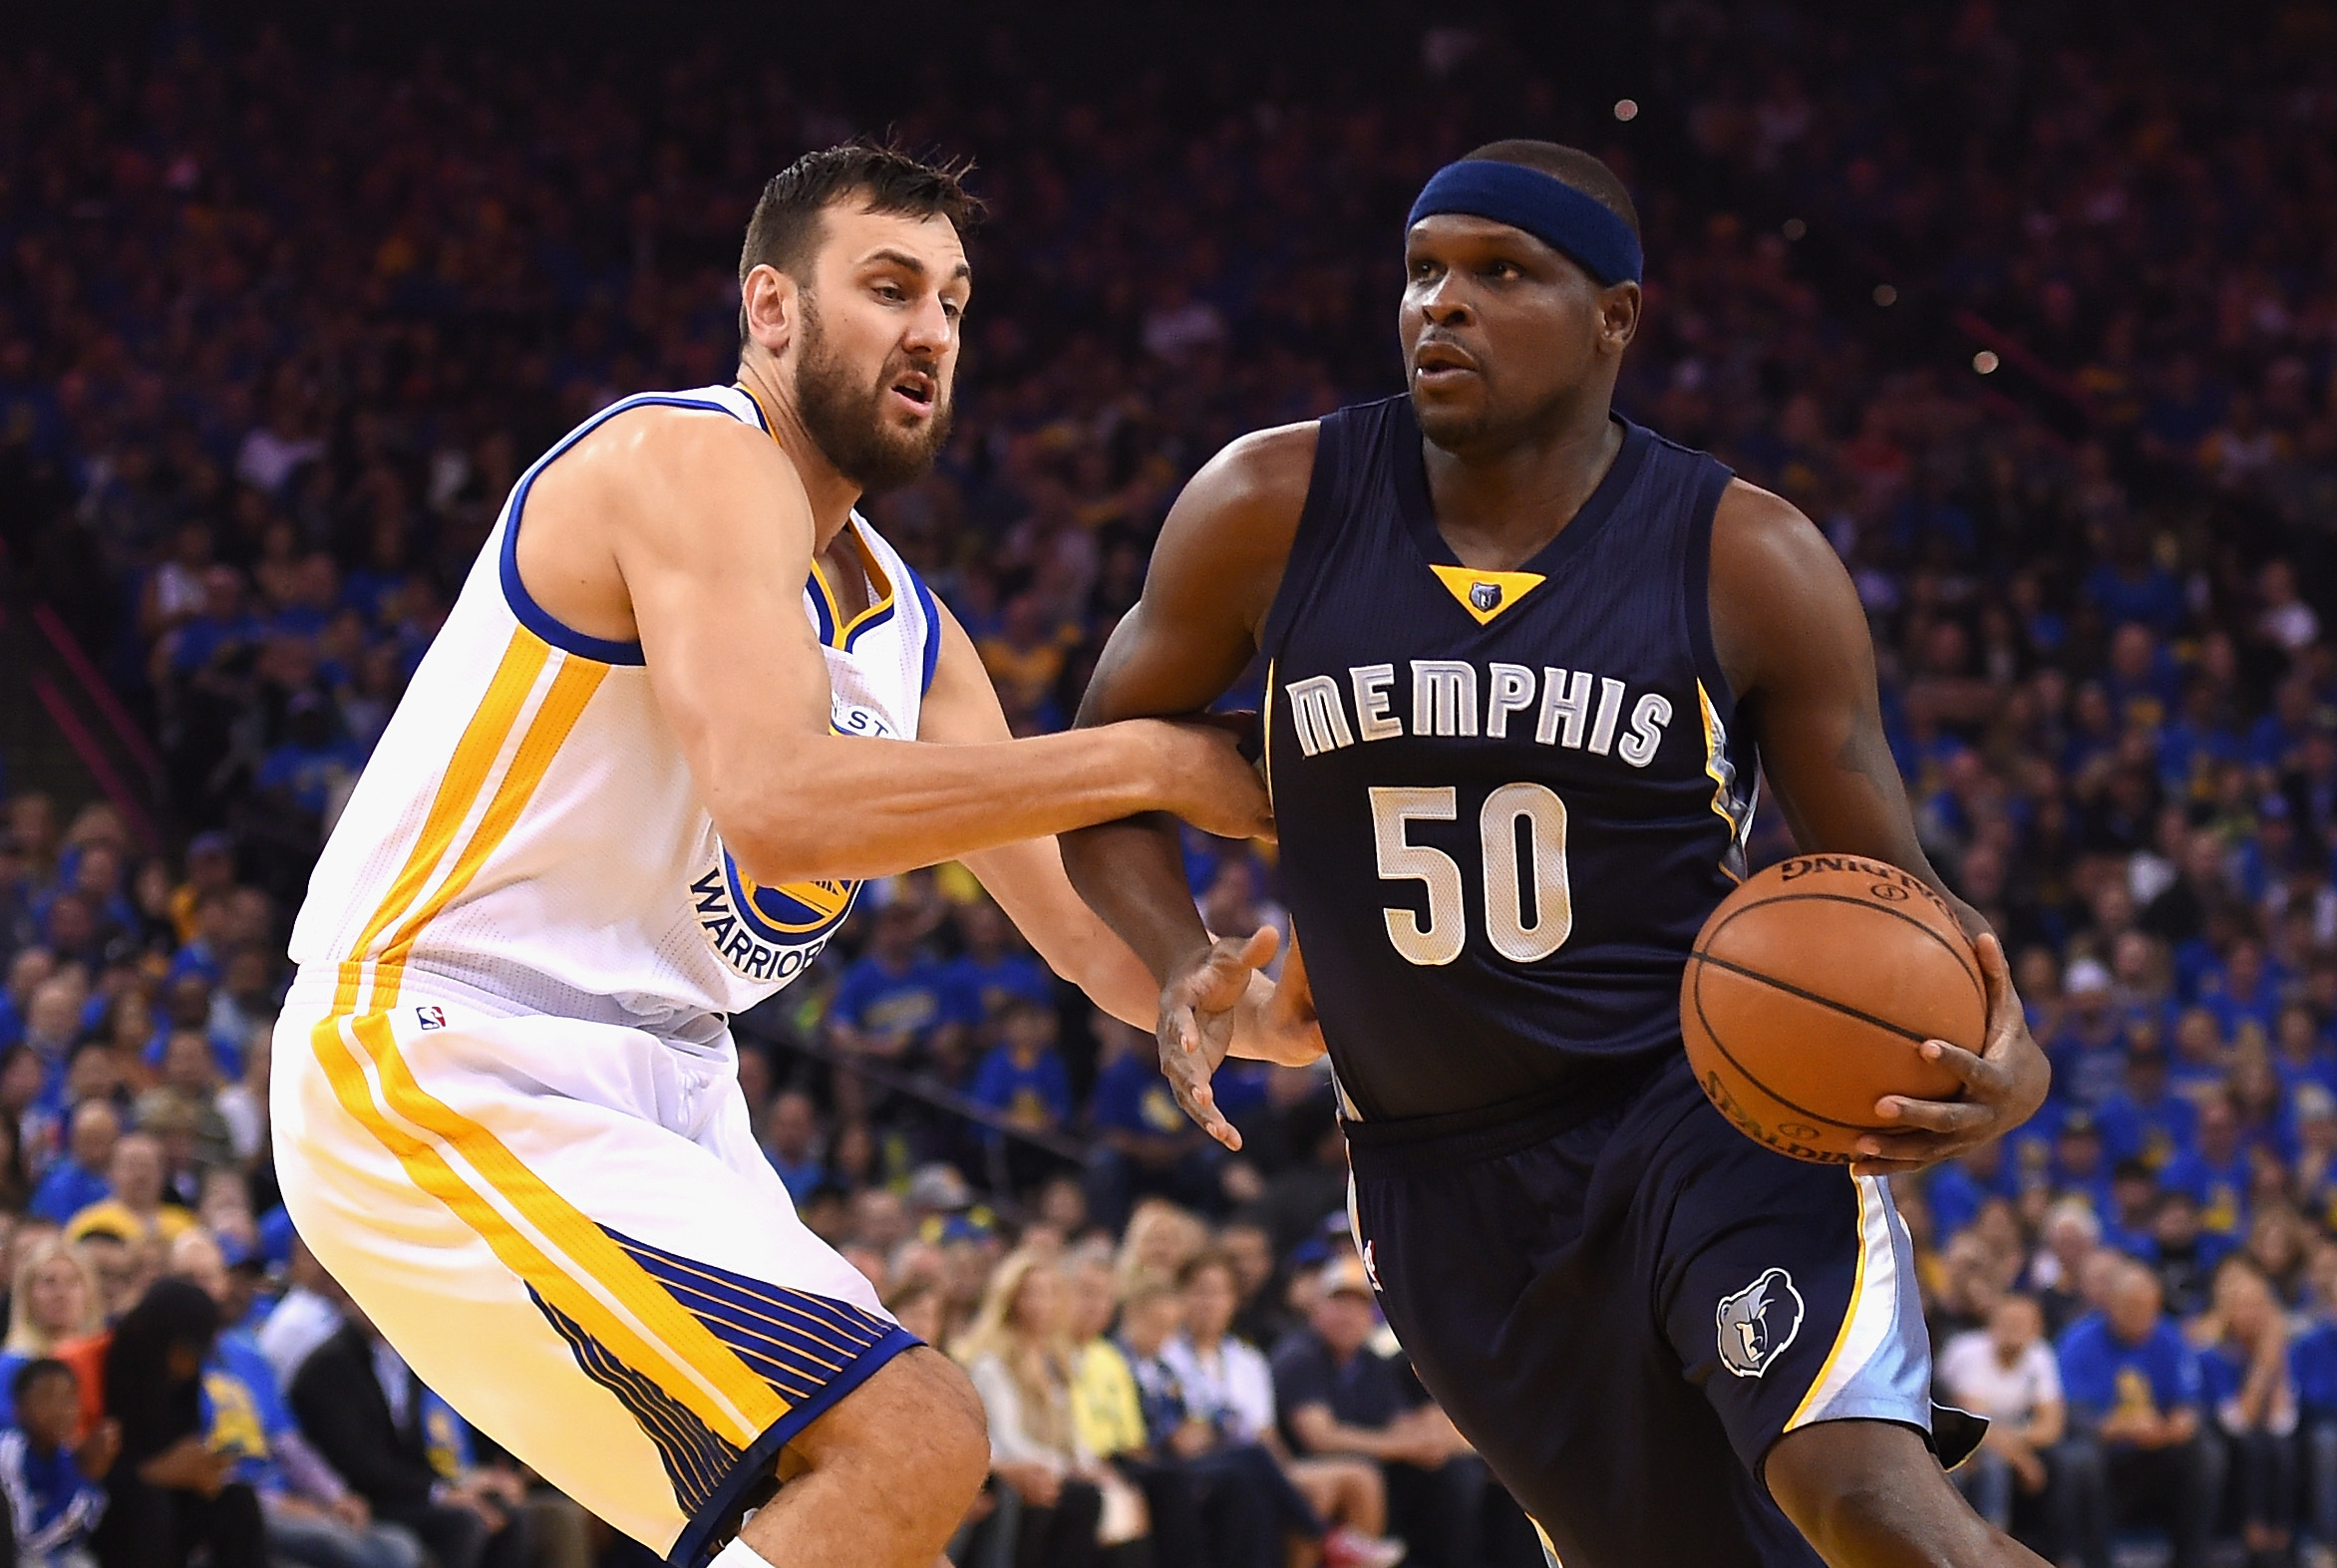 Zach Randolph to come off the bench for Grizzlies this season.